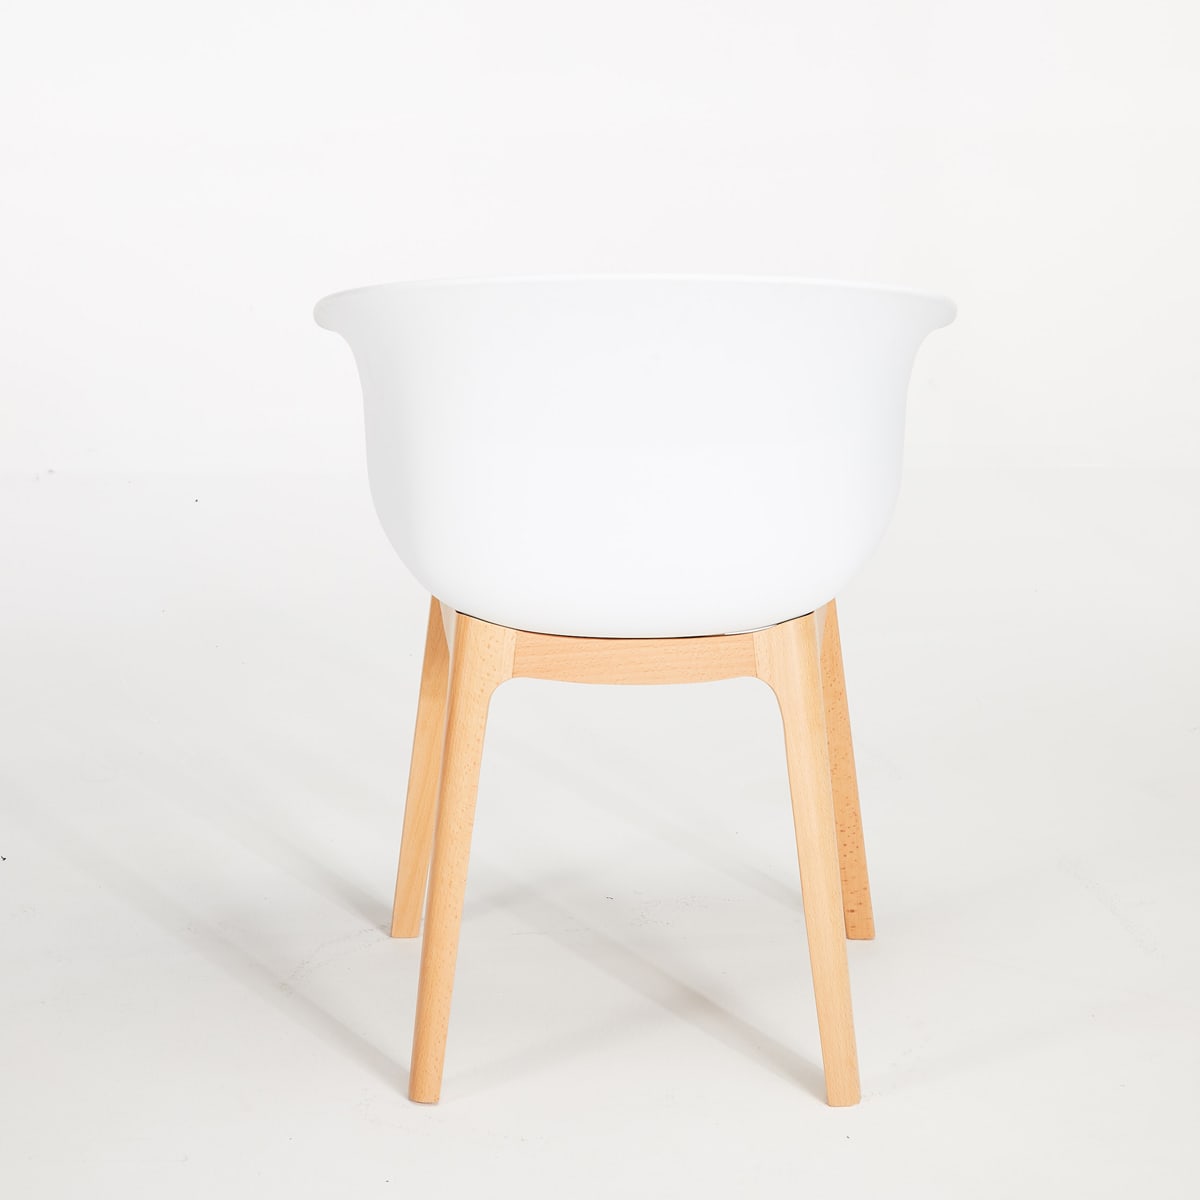 Queen Dining Chair - White / Beech - Styled Image by Grado